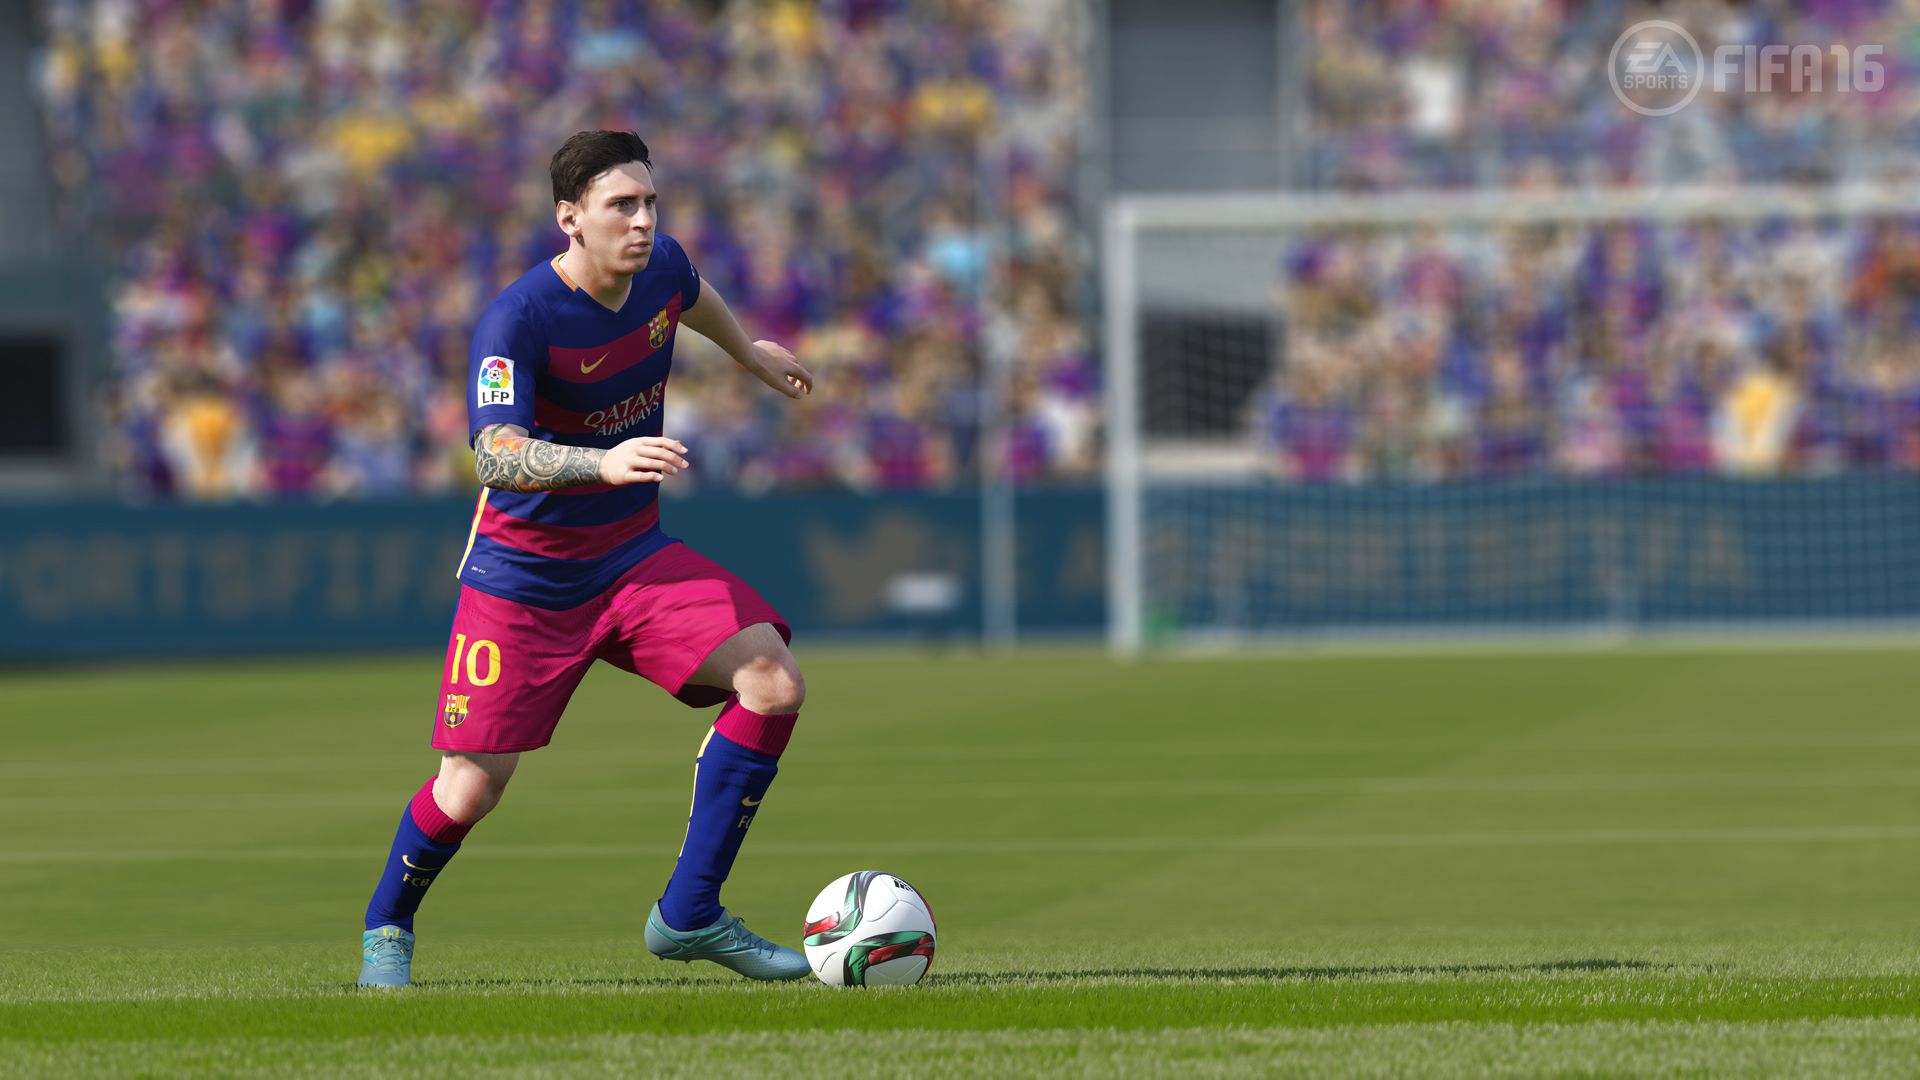 Picture Of Game Changer: FIFA 17 12 12